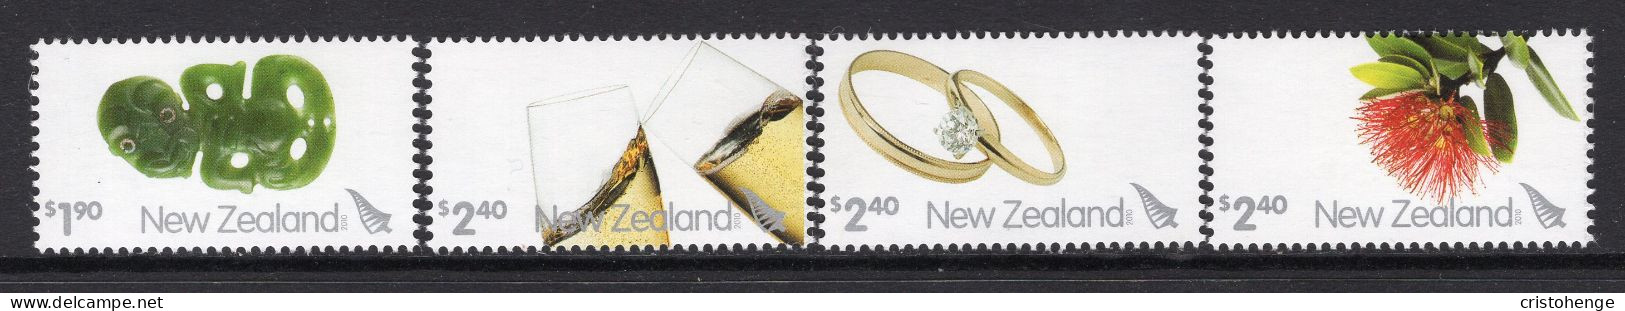 New Zealand 2010 Personlised Stamps - $1.90 Values Set From MS MNH (from SG MS3238) - Unused Stamps